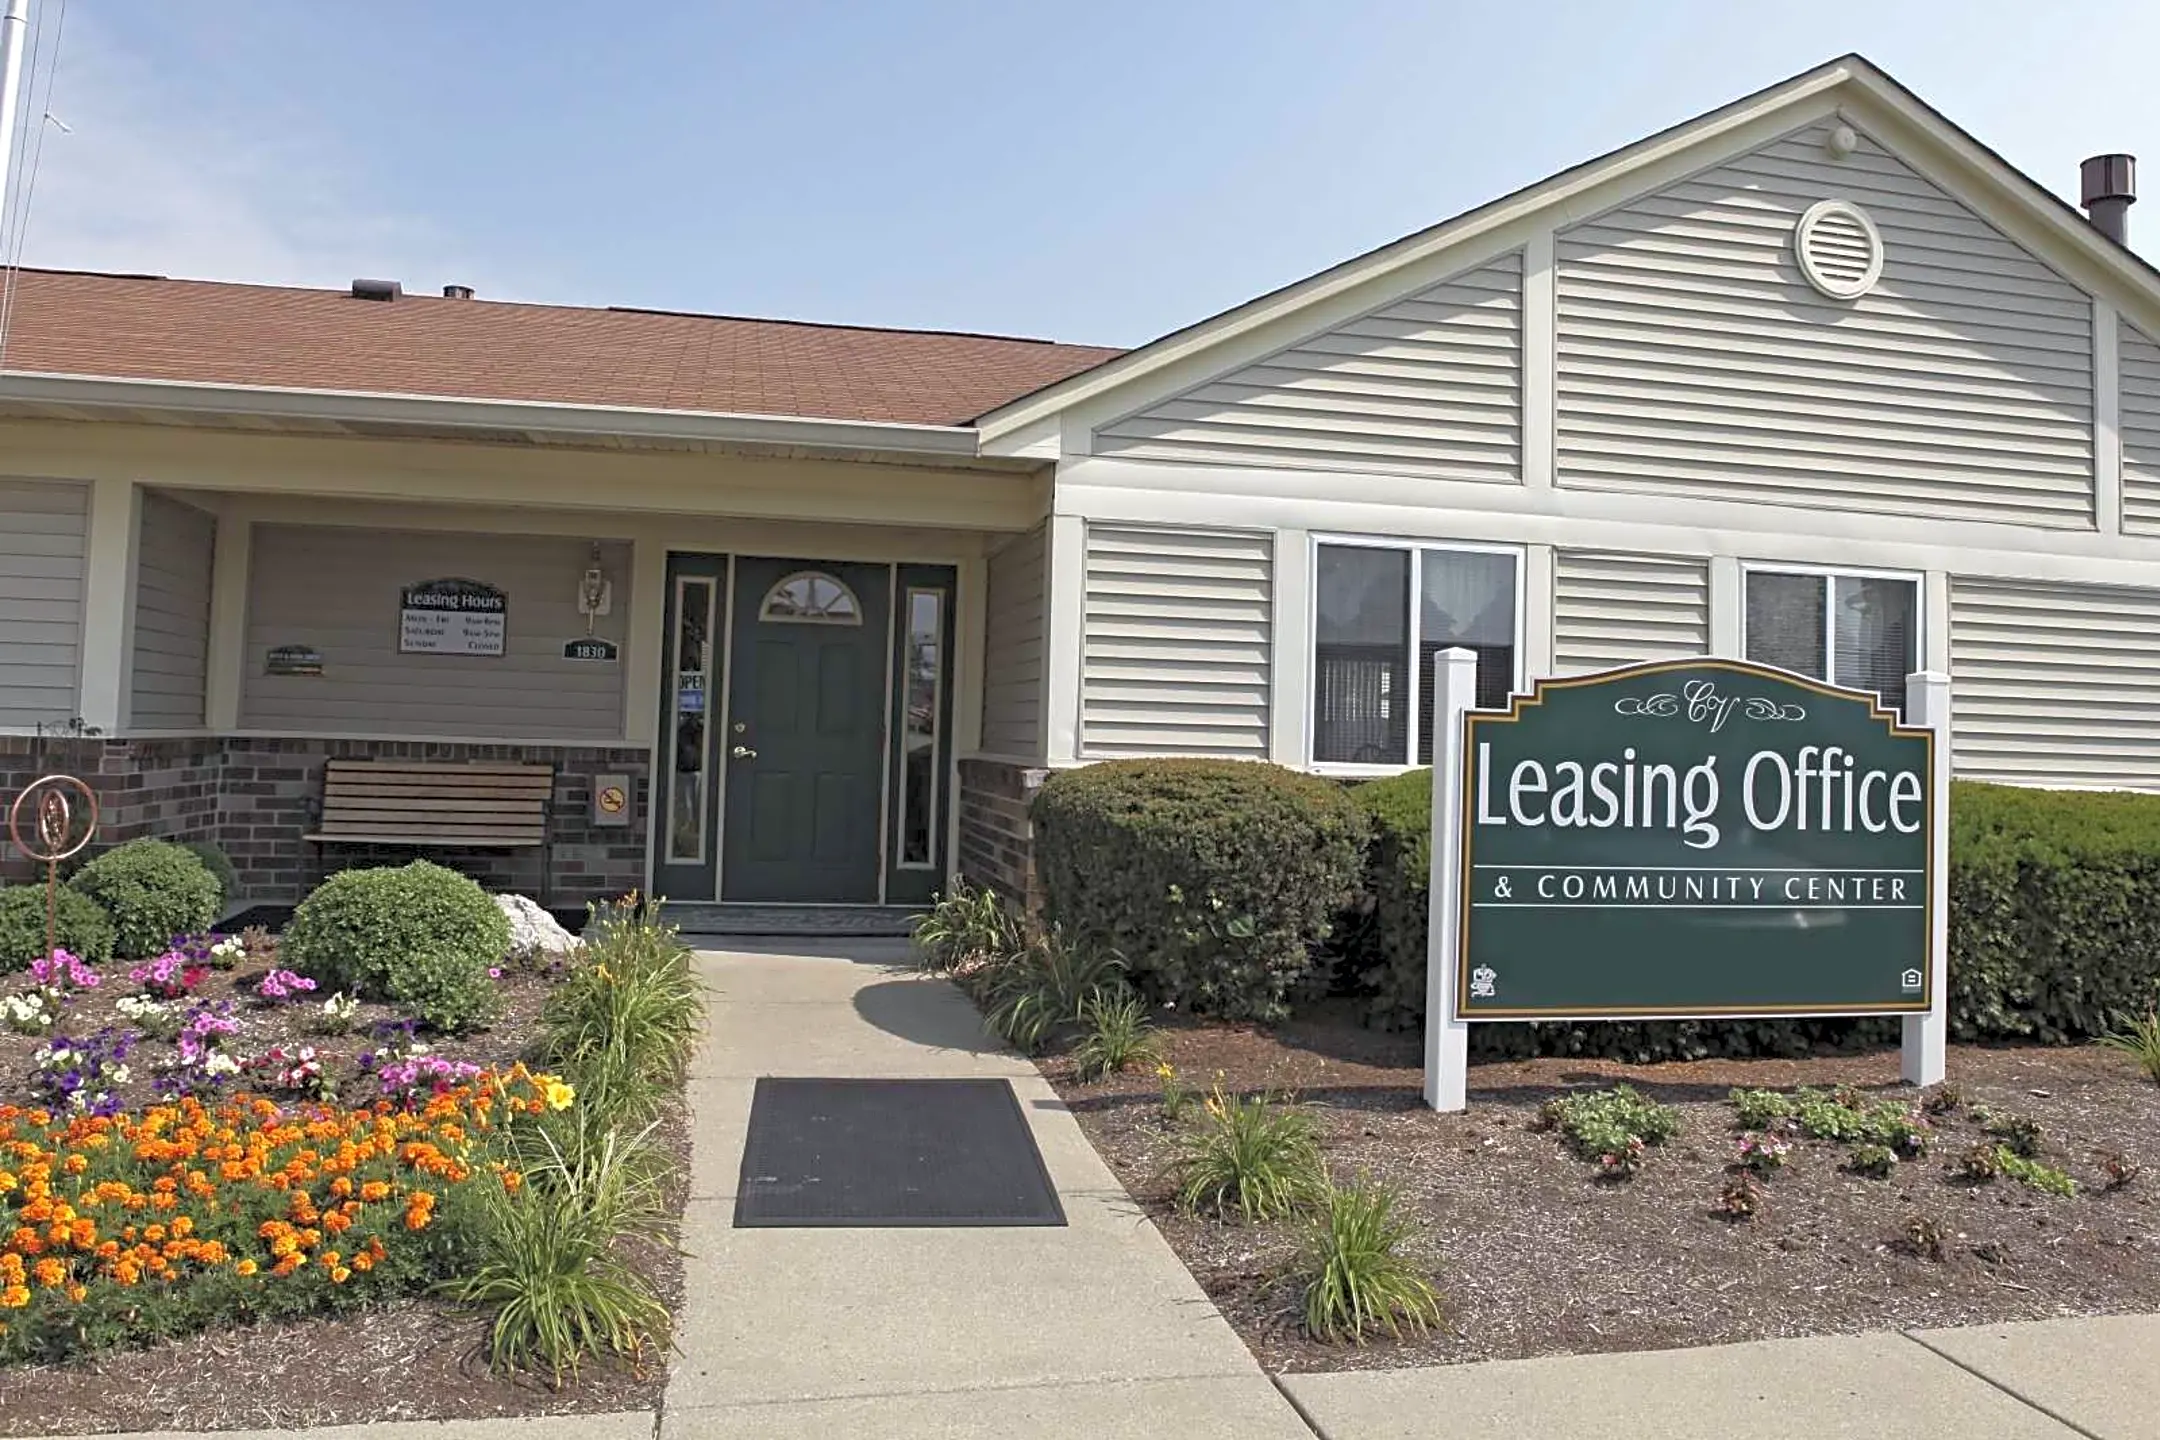 Leasing Office - Colonial Village Apartments - Clarksville, IN